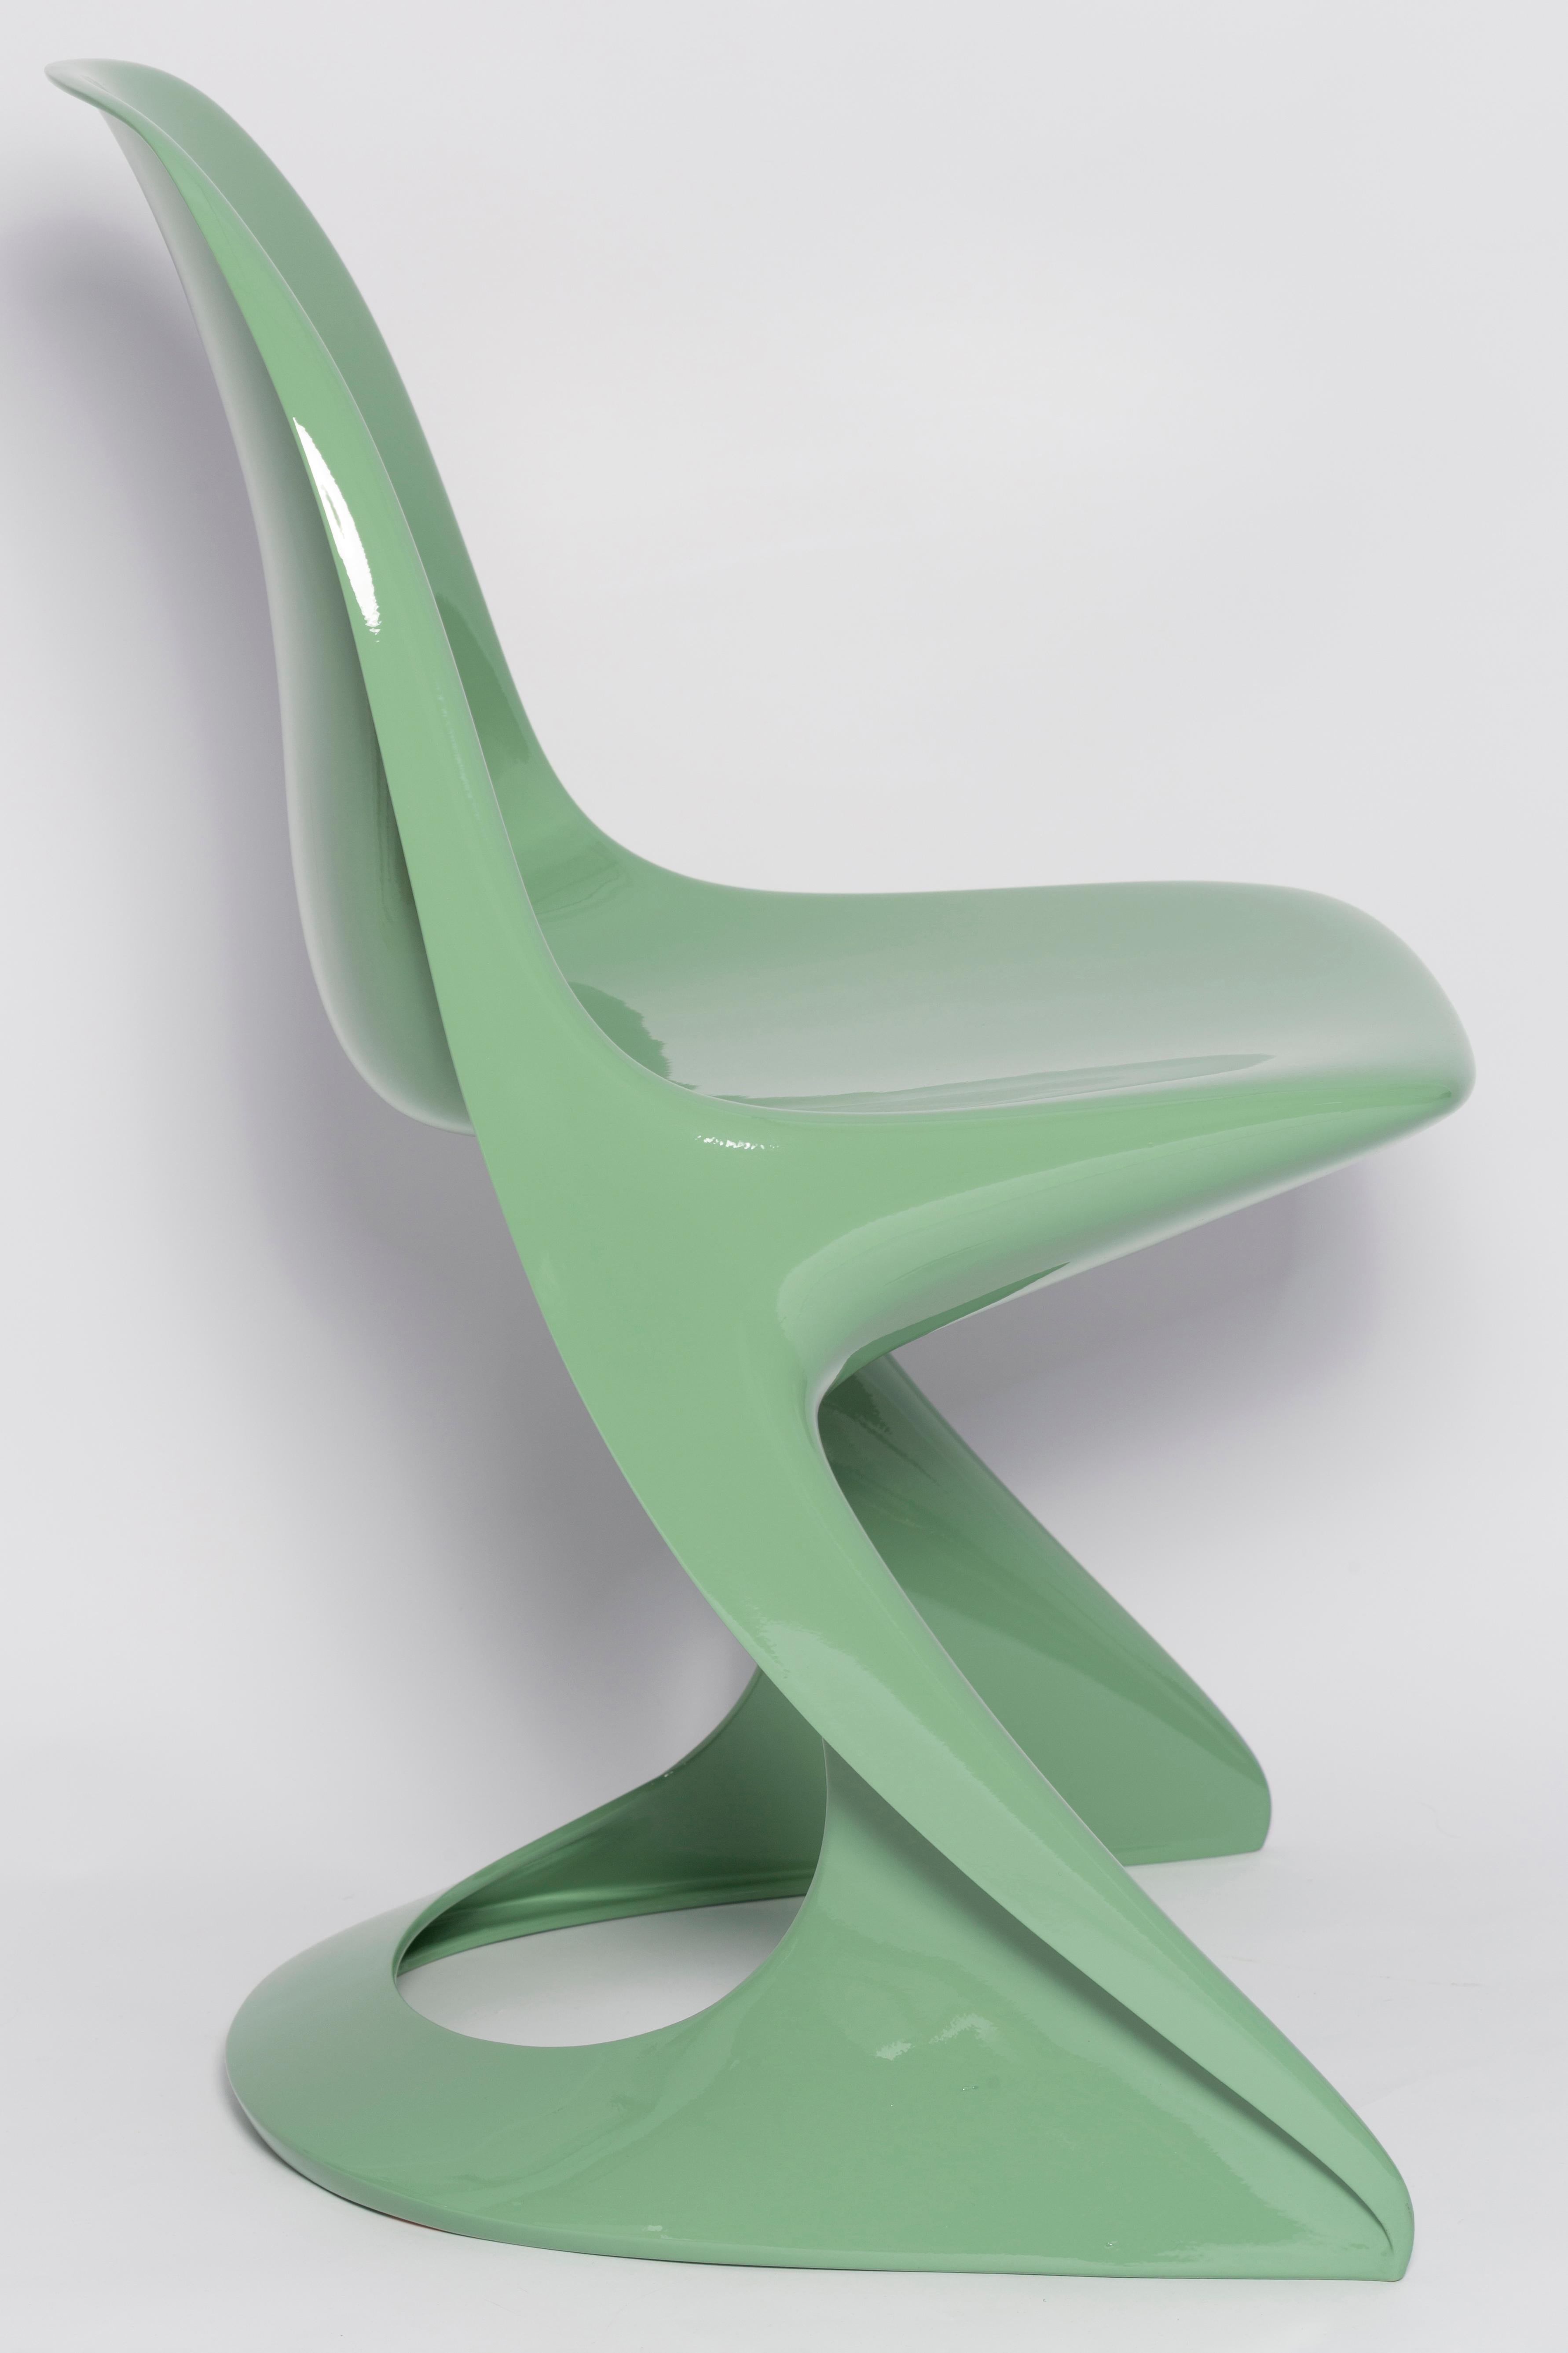 Four Mid-Century Casalino Chairs in Jade Green, Alexander Begge, Casala, 1970s For Sale 1